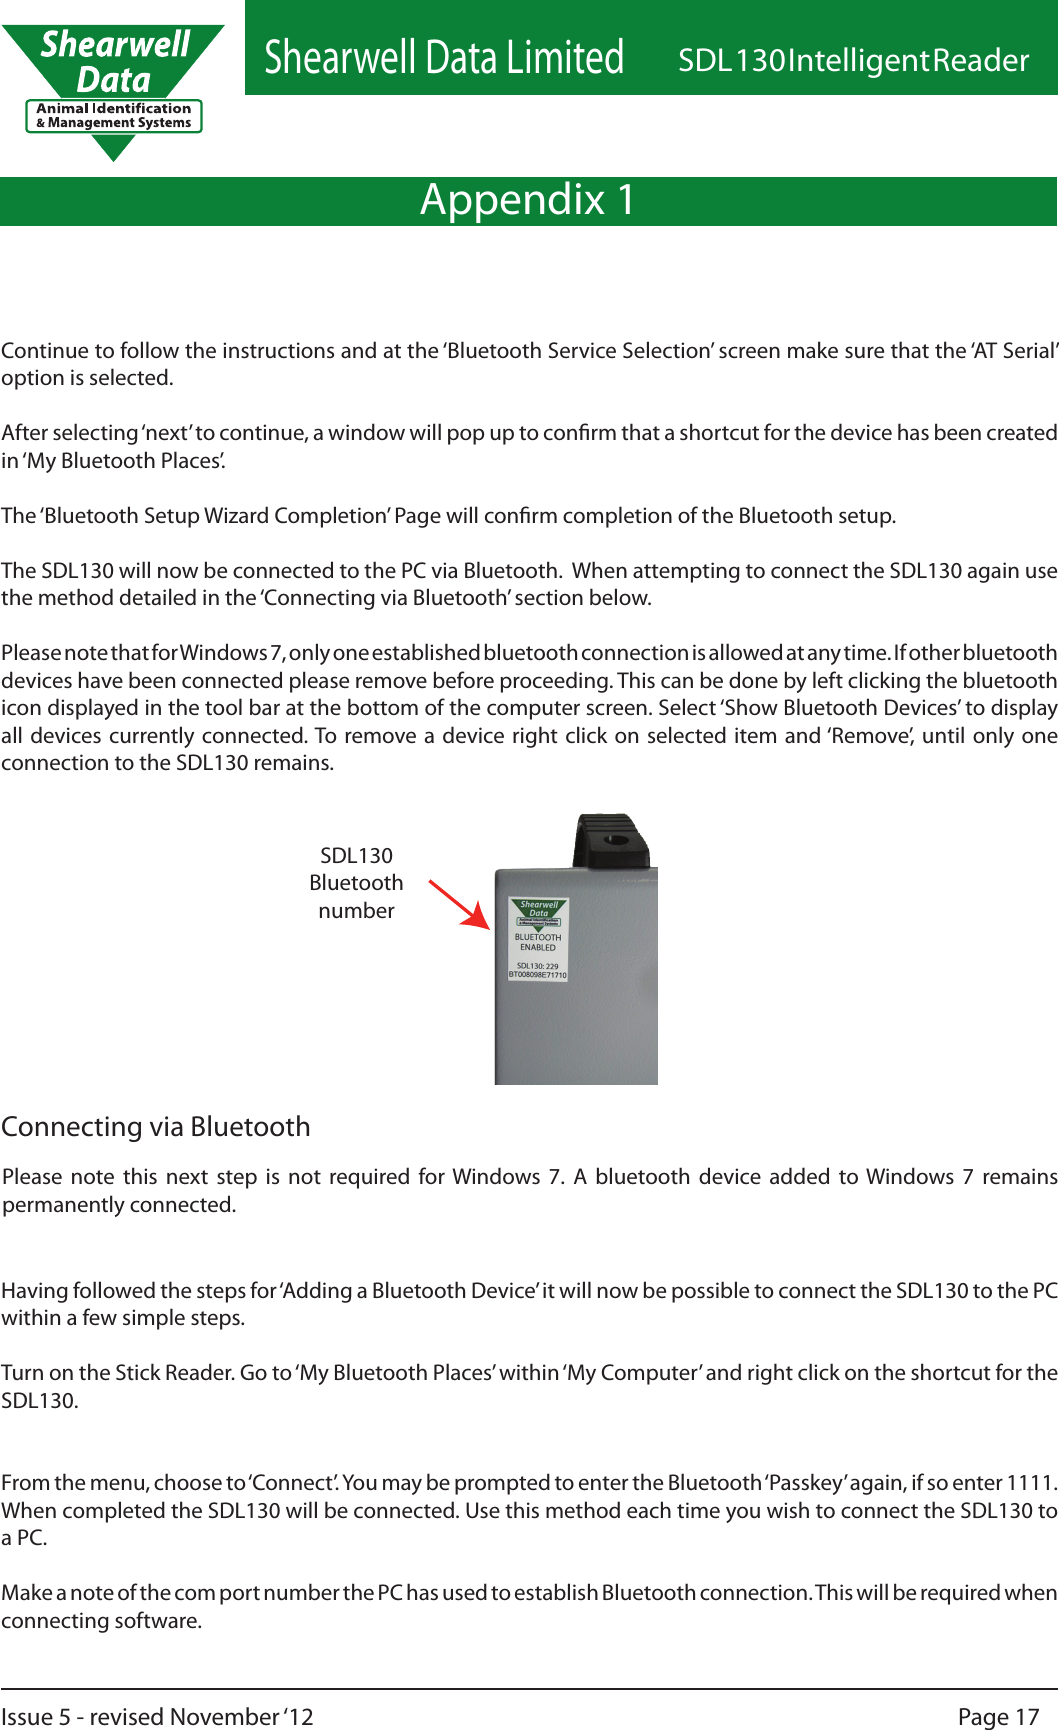 Shearwell Data LimitedSDL 130 Intelligent ReaderPage 17Issue 5 - revised November ‘12Appendix 1Having followed the steps for ‘Adding a Bluetooth Device’ it will now be possible to connect the SDL130 to the PC within a few simple steps.Turn on the Stick Reader. Go to ‘My Bluetooth Places’ within ‘My Computer’ and right click on the shortcut for the SDL130. From the menu, choose to ‘Connect’. You may be prompted to enter the Bluetooth ‘Passkey’ again, if so enter 1111. When completed the SDL130 will be connected. Use this method each time you wish to connect the SDL130 to a PC.Make a note of the com port number the PC has used to establish Bluetooth connection. This will be required when connecting software.Continue to follow the instructions and at the ‘Bluetooth Service Selection’ screen make sure that the ‘AT Serial’ option is selected.After selecting ‘next’ to continue, a window will pop up to conrm that a shortcut for the device has been created in ‘My Bluetooth Places’.The ‘Bluetooth Setup Wizard Completion’ Page will conrm completion of the Bluetooth setup.The SDL130 will now be connected to the PC via Bluetooth.  When attempting to connect the SDL130 again use the method detailed in the ‘Connecting via Bluetooth’ section below.Please note that for Windows 7, only one established bluetooth connection is allowed at any time. If other bluetooth devices have been connected please remove before proceeding. This can be done by left clicking the bluetooth icon displayed in the tool bar at the bottom of the computer screen. Select ‘Show Bluetooth Devices’ to display all devices currently connected. To remove a device right click  on selected item and ‘Remove’,  until only  one connection to the SDL130 remains.Please  note  this  next  step  is  not  required  for Windows  7.  A  bluetooth  device  added  to Windows  7  remains permanently connected.Connecting via BluetoothSDL130Bluetoothnumber